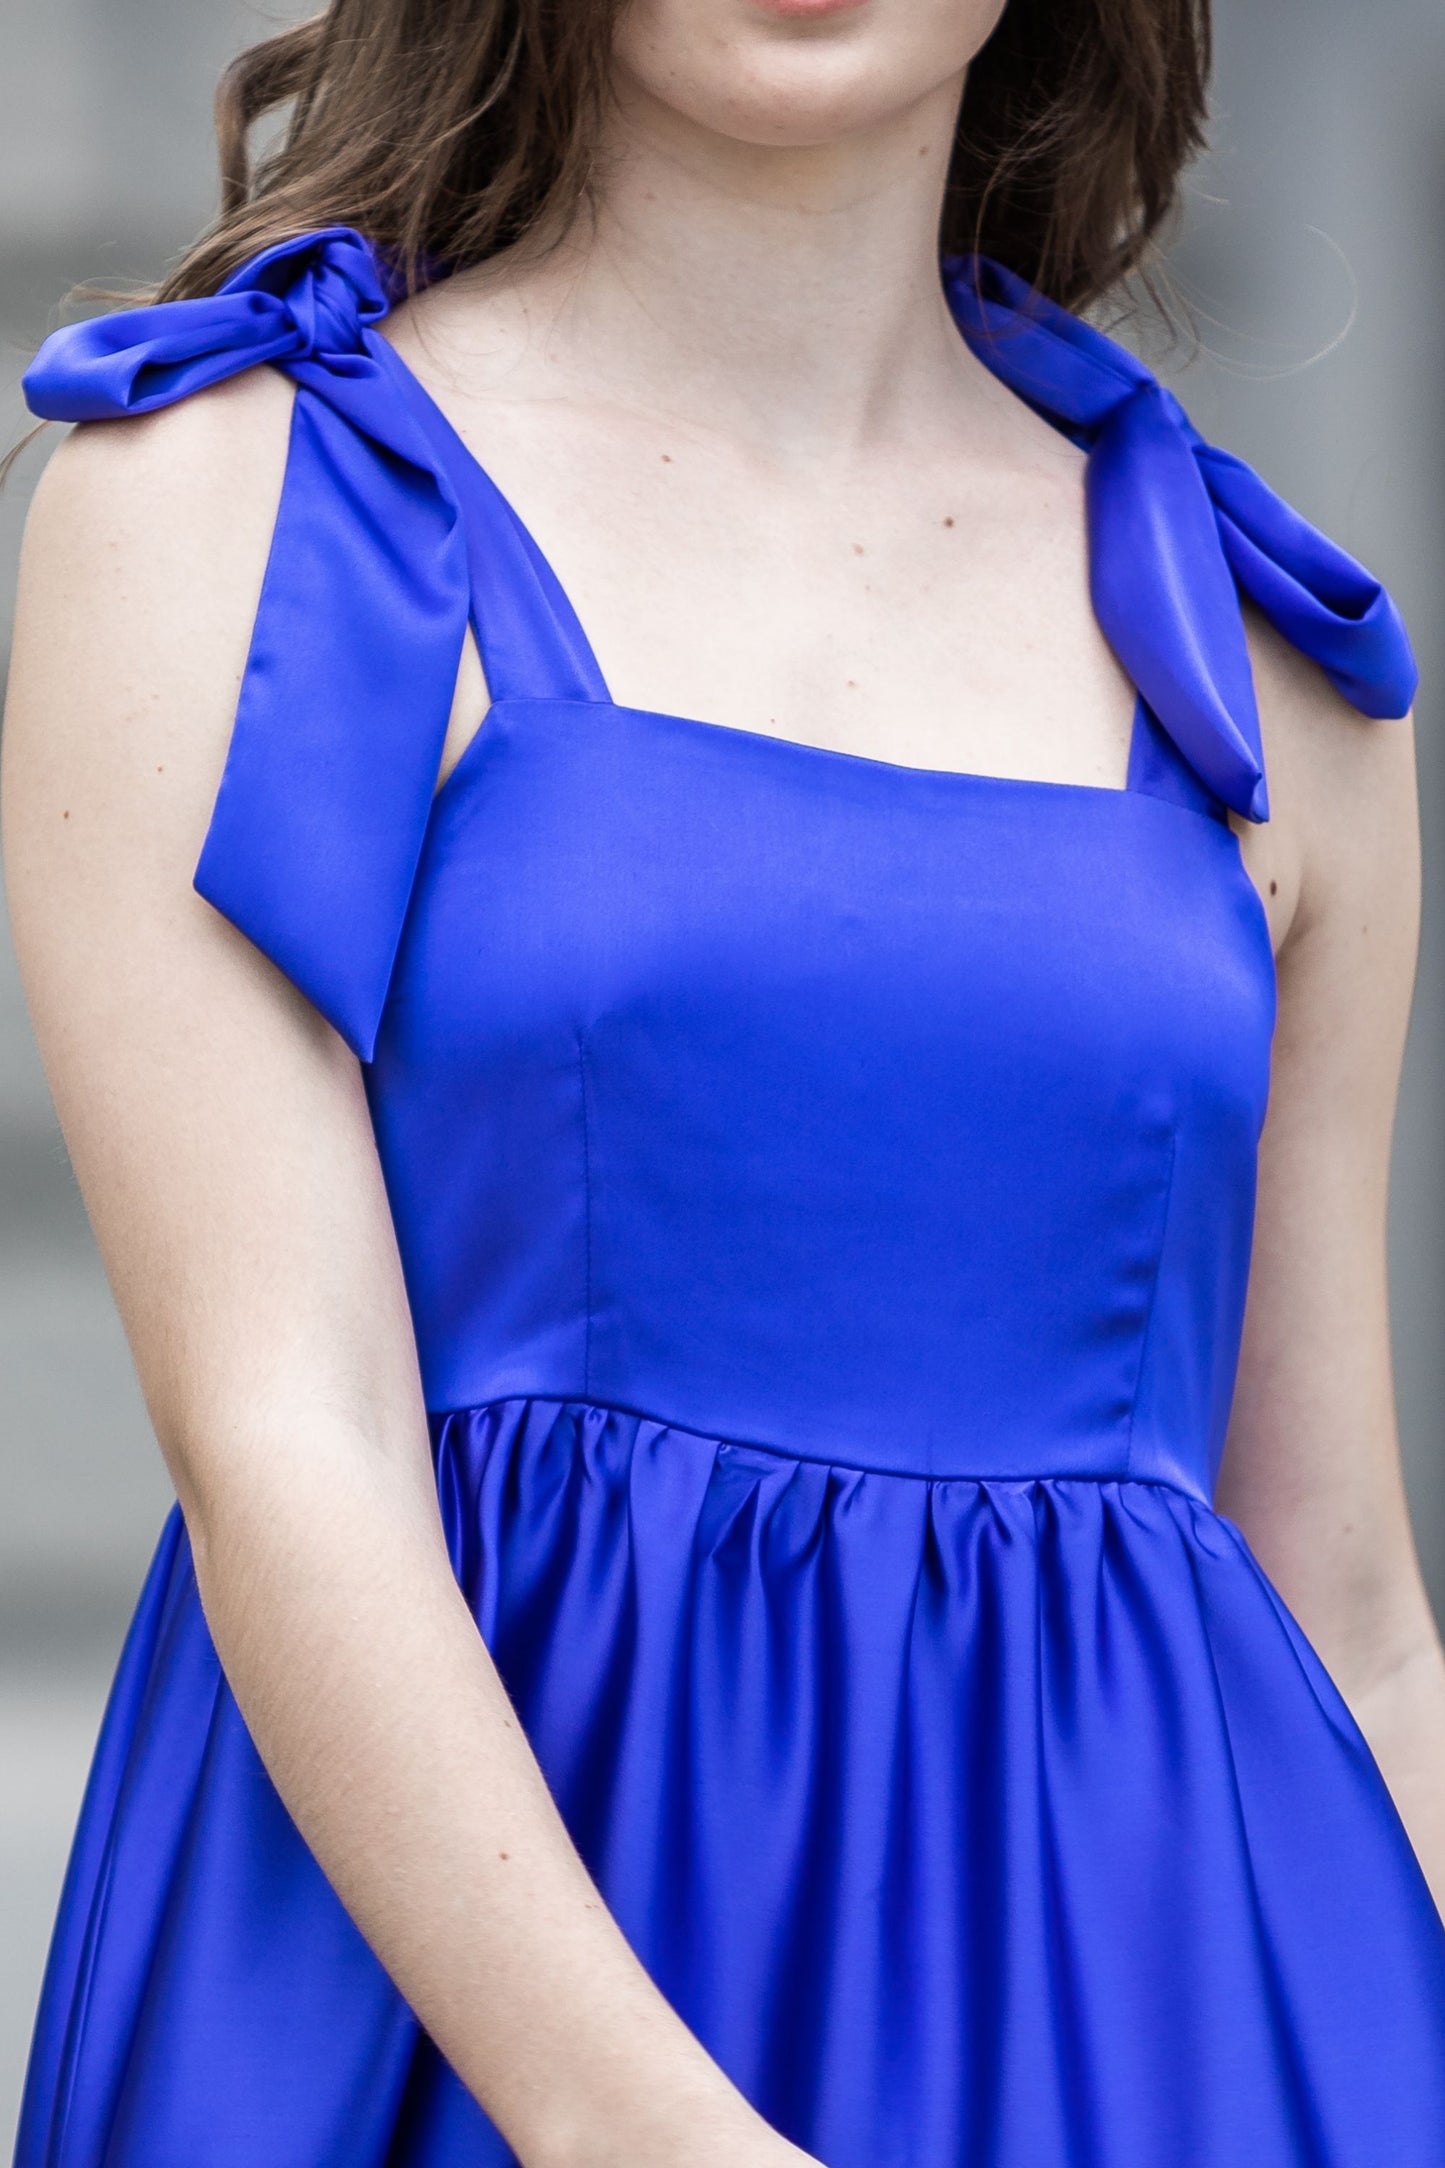 Royal blue satin dress with bows on the shoulders